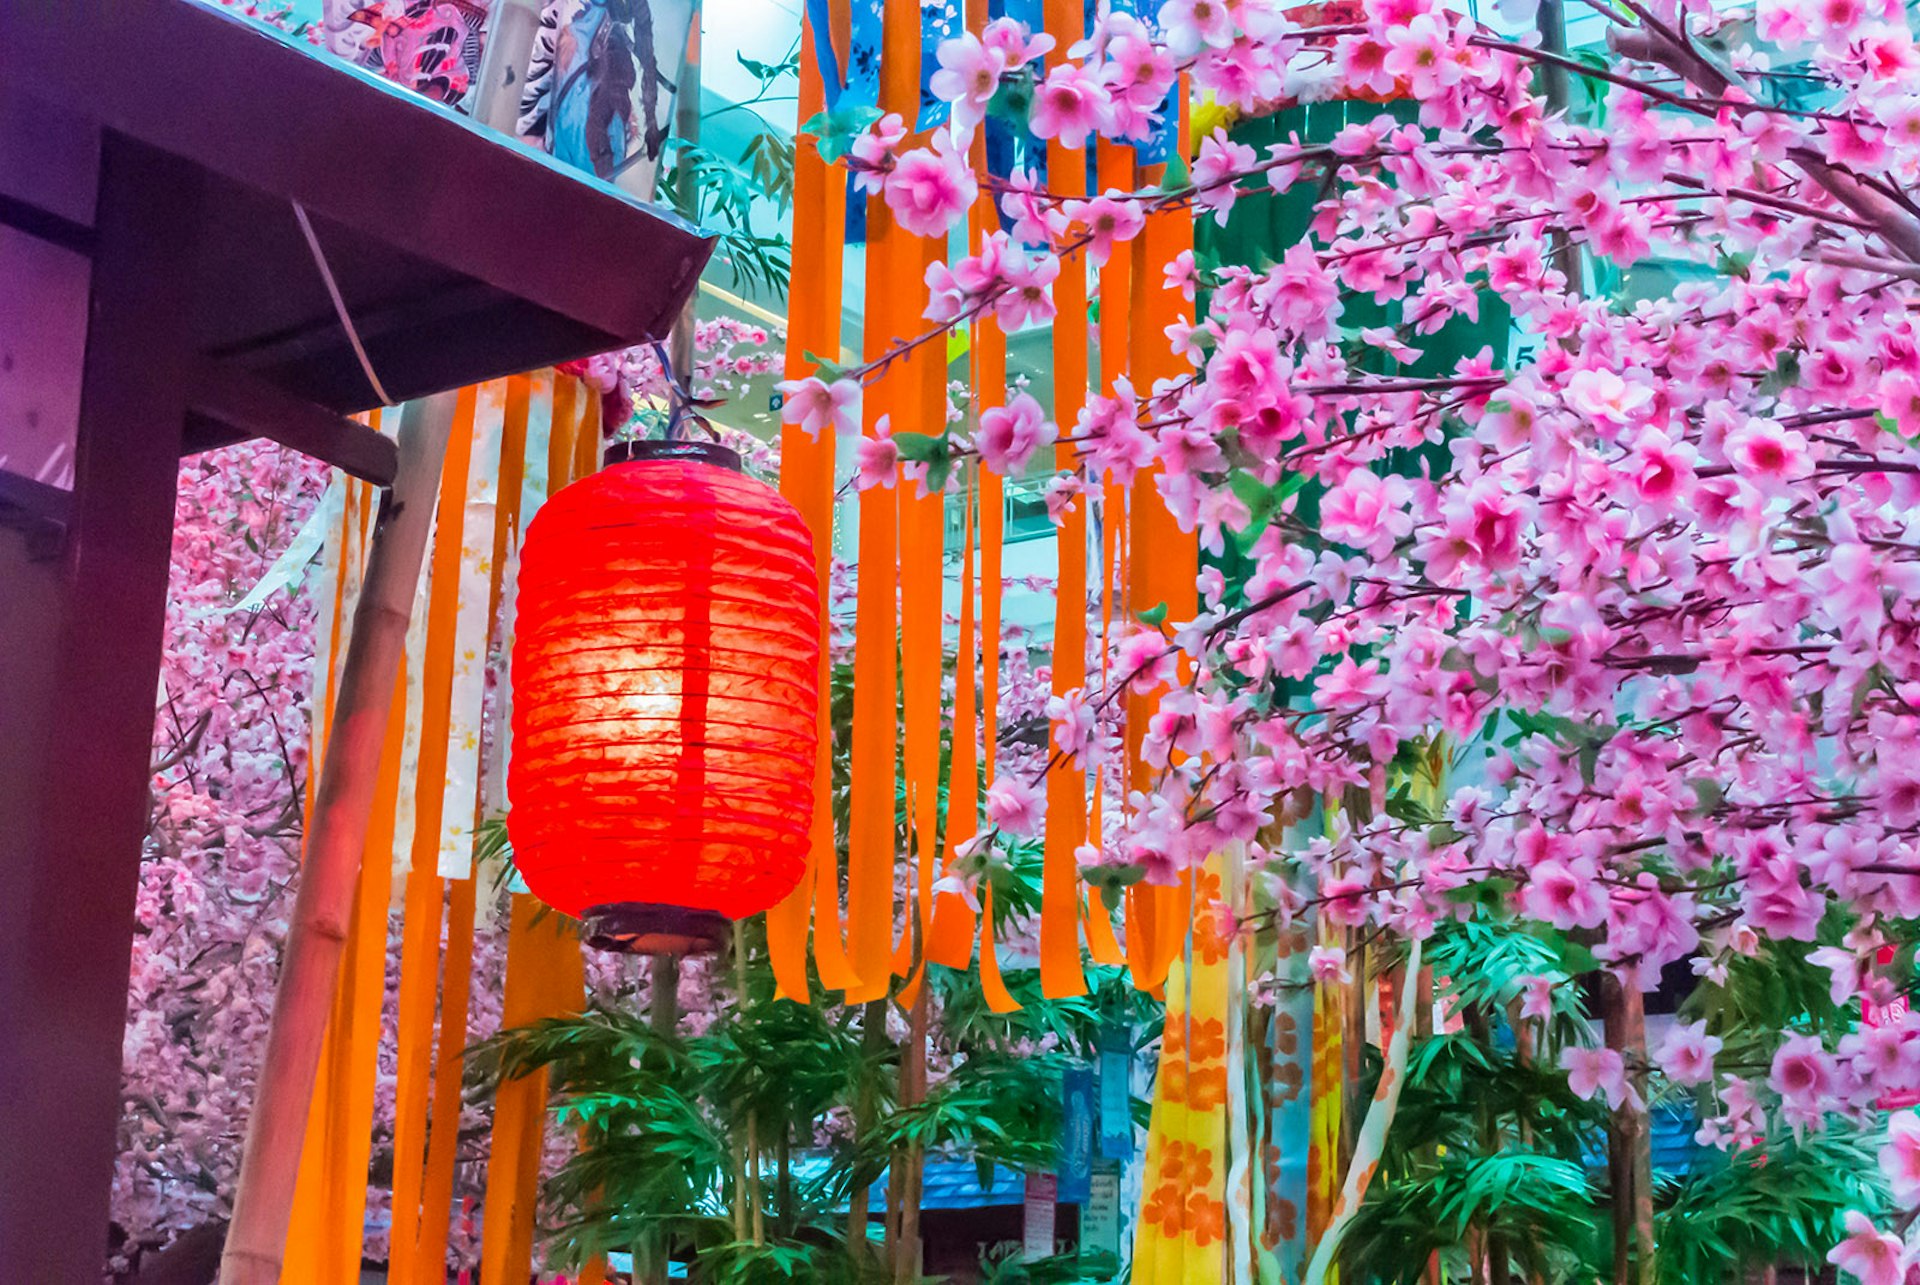 Trees in full pink blossom hang low near a building with a large red lantern hanging outside. Orange and yellow paper streamers hang behind.